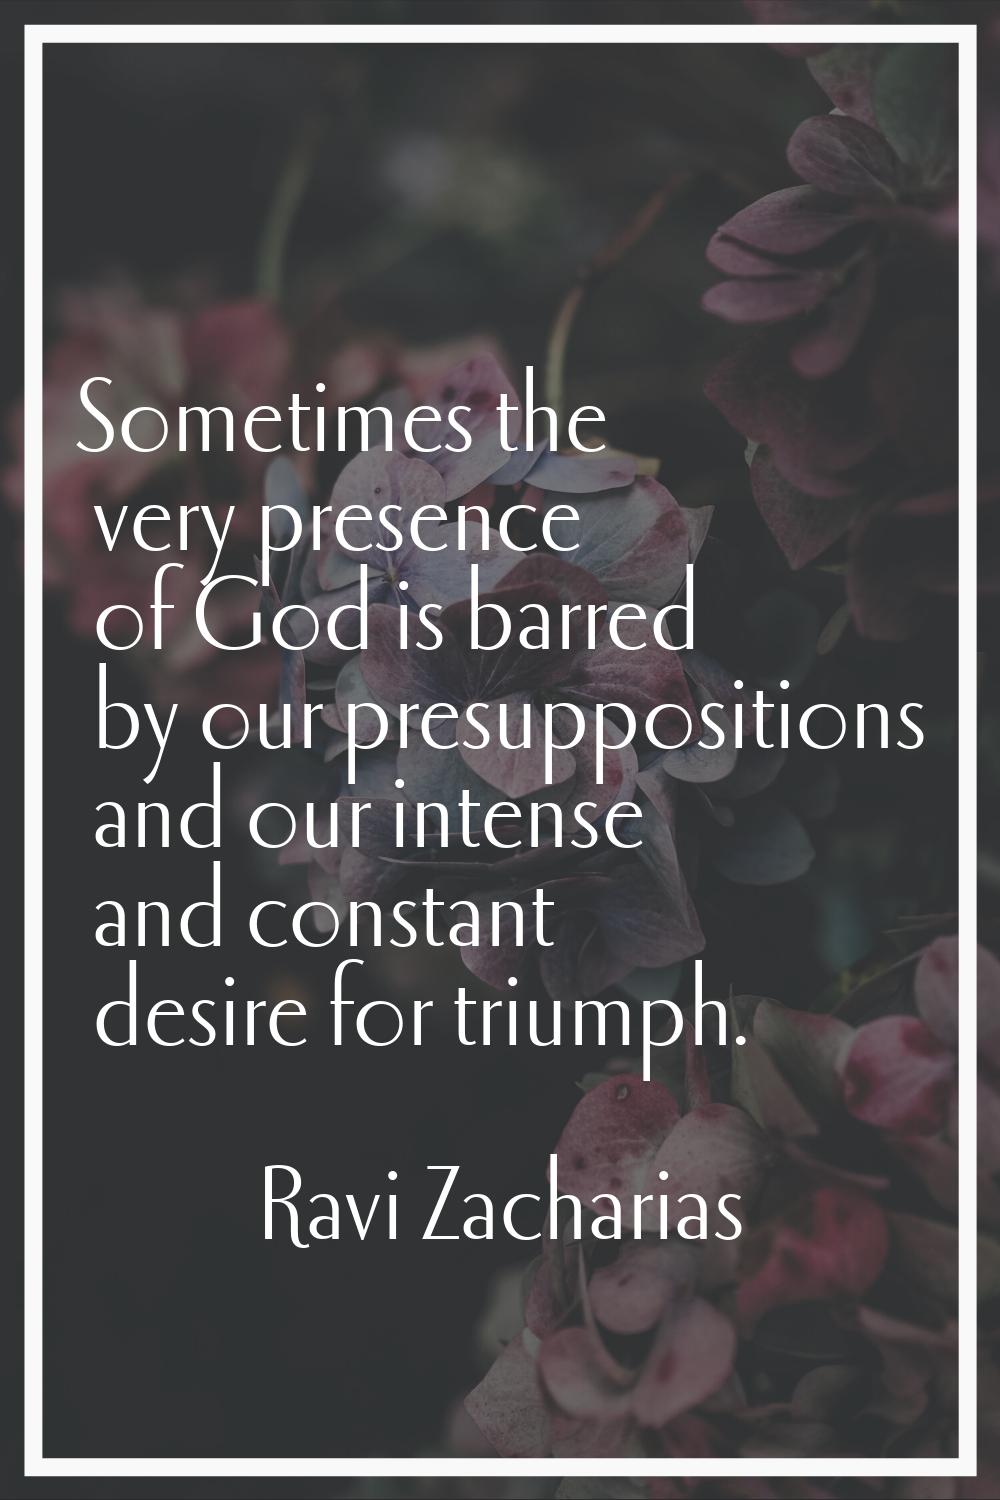 Sometimes the very presence of God is barred by our presuppositions and our intense and constant de